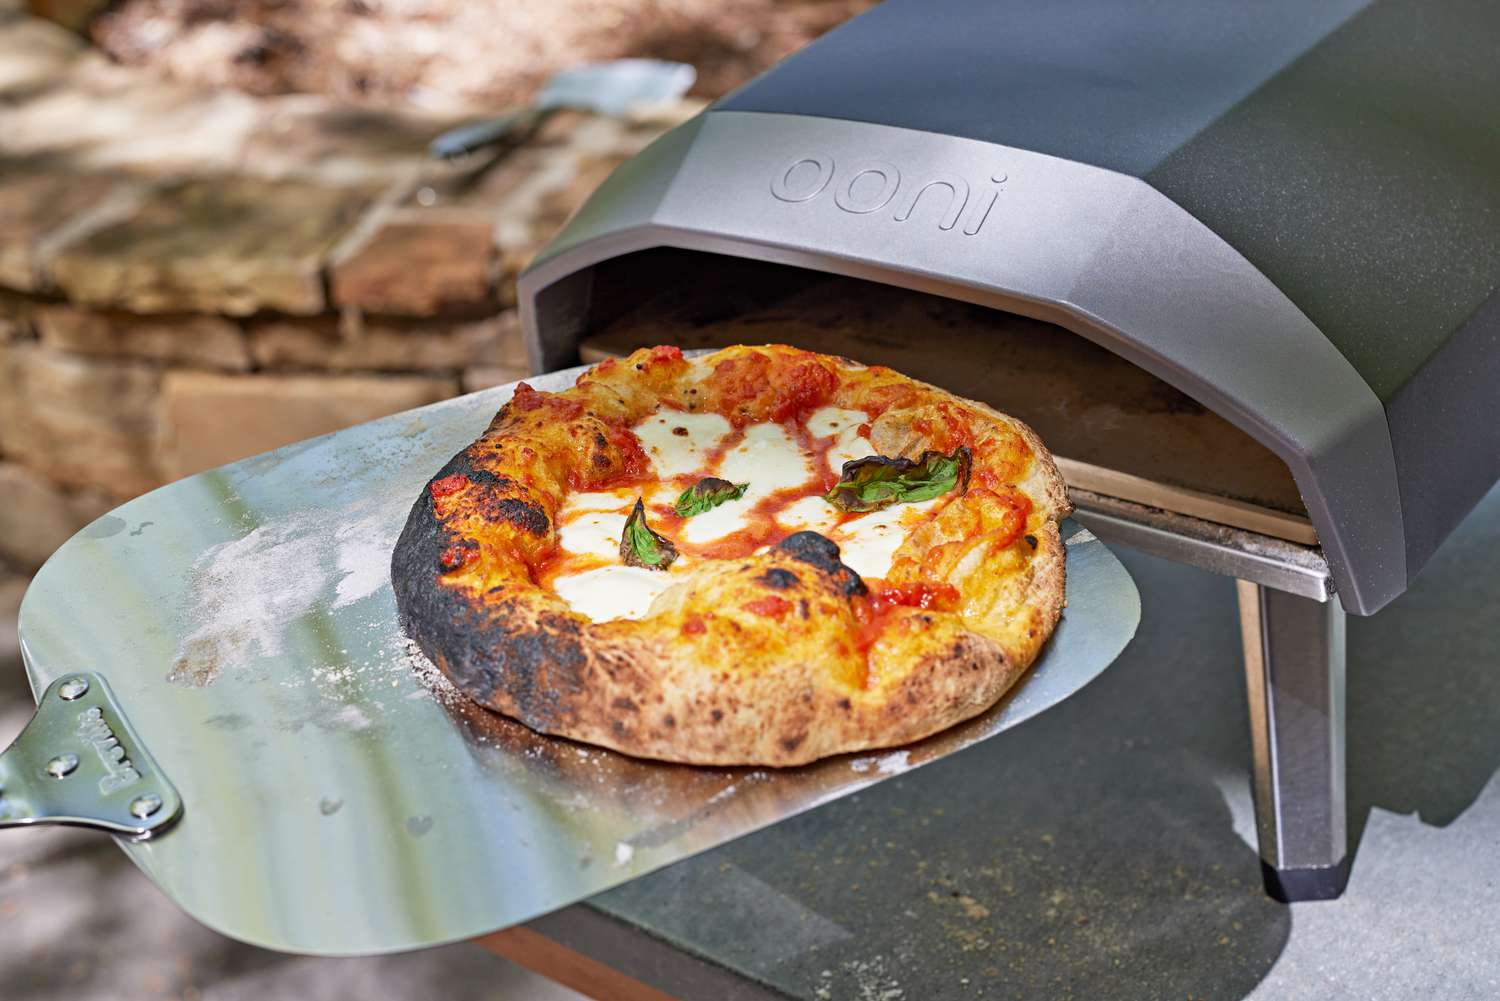 The Best-Looking Outdoor Pizza Ovens